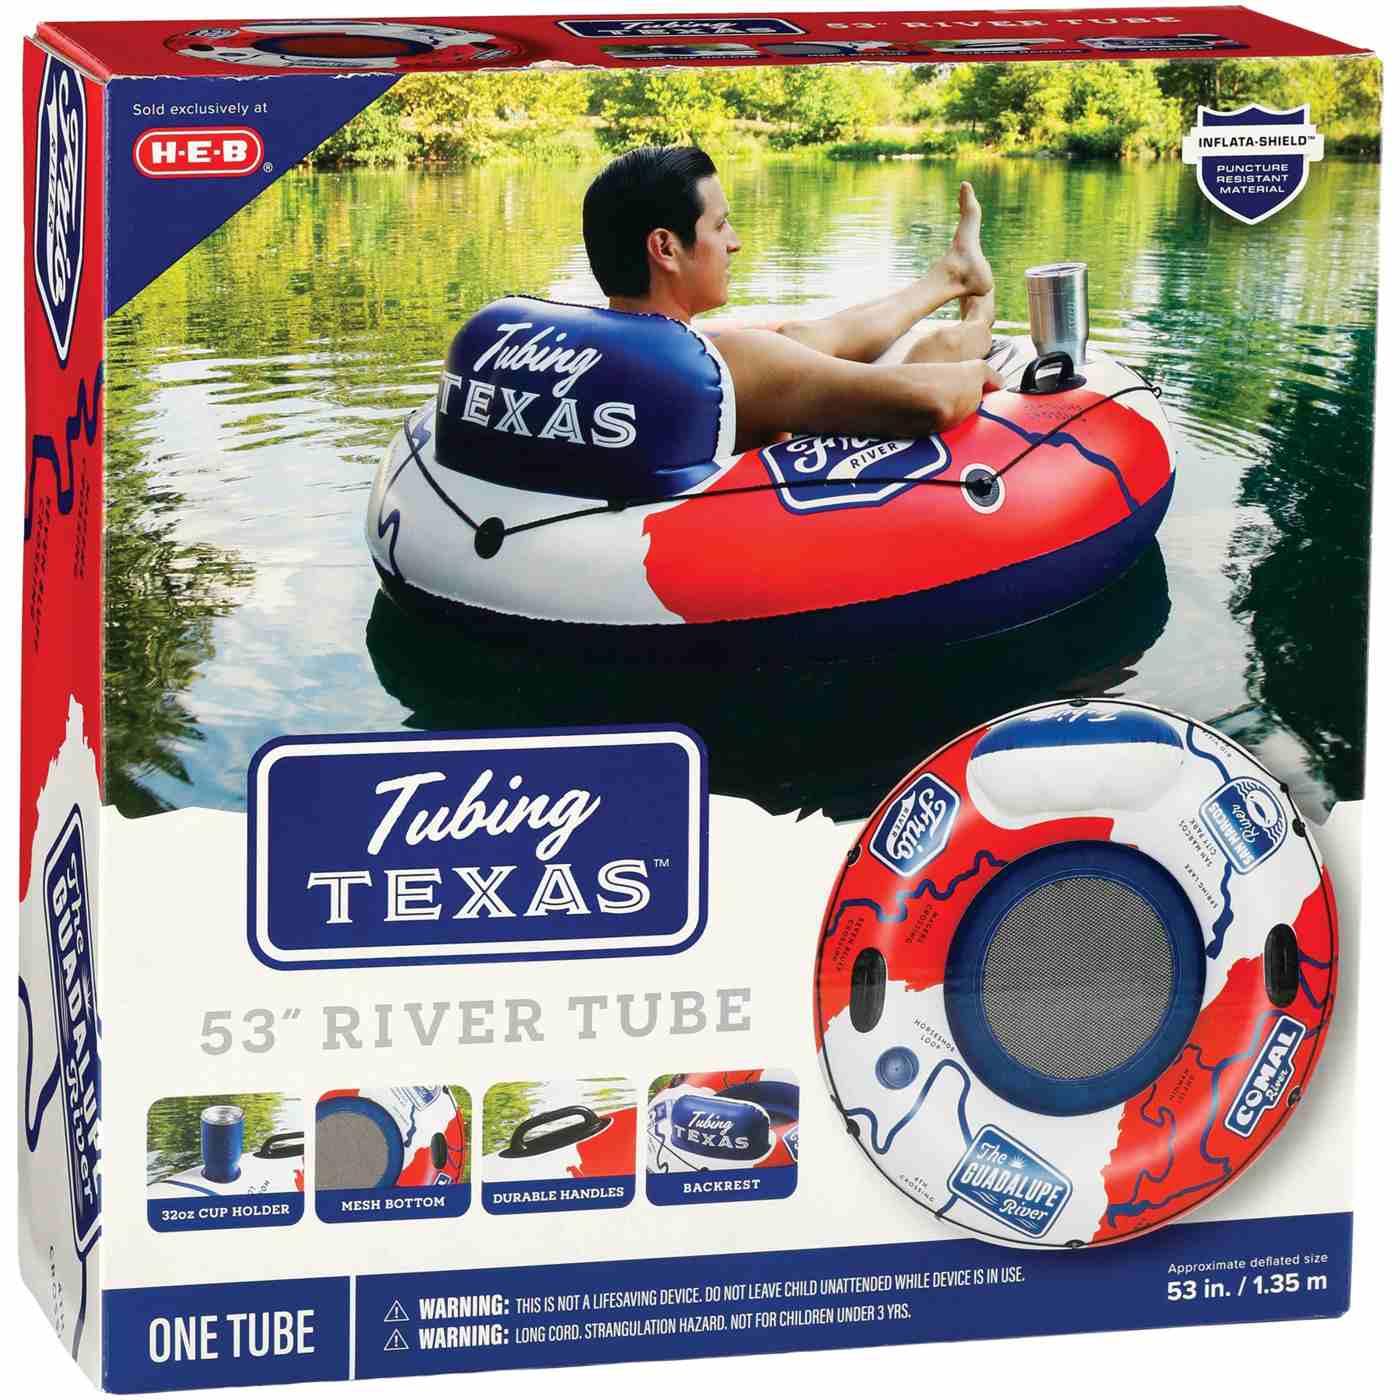 H-E-B Tubing Texas Inflatable River Tube - Red; image 1 of 2